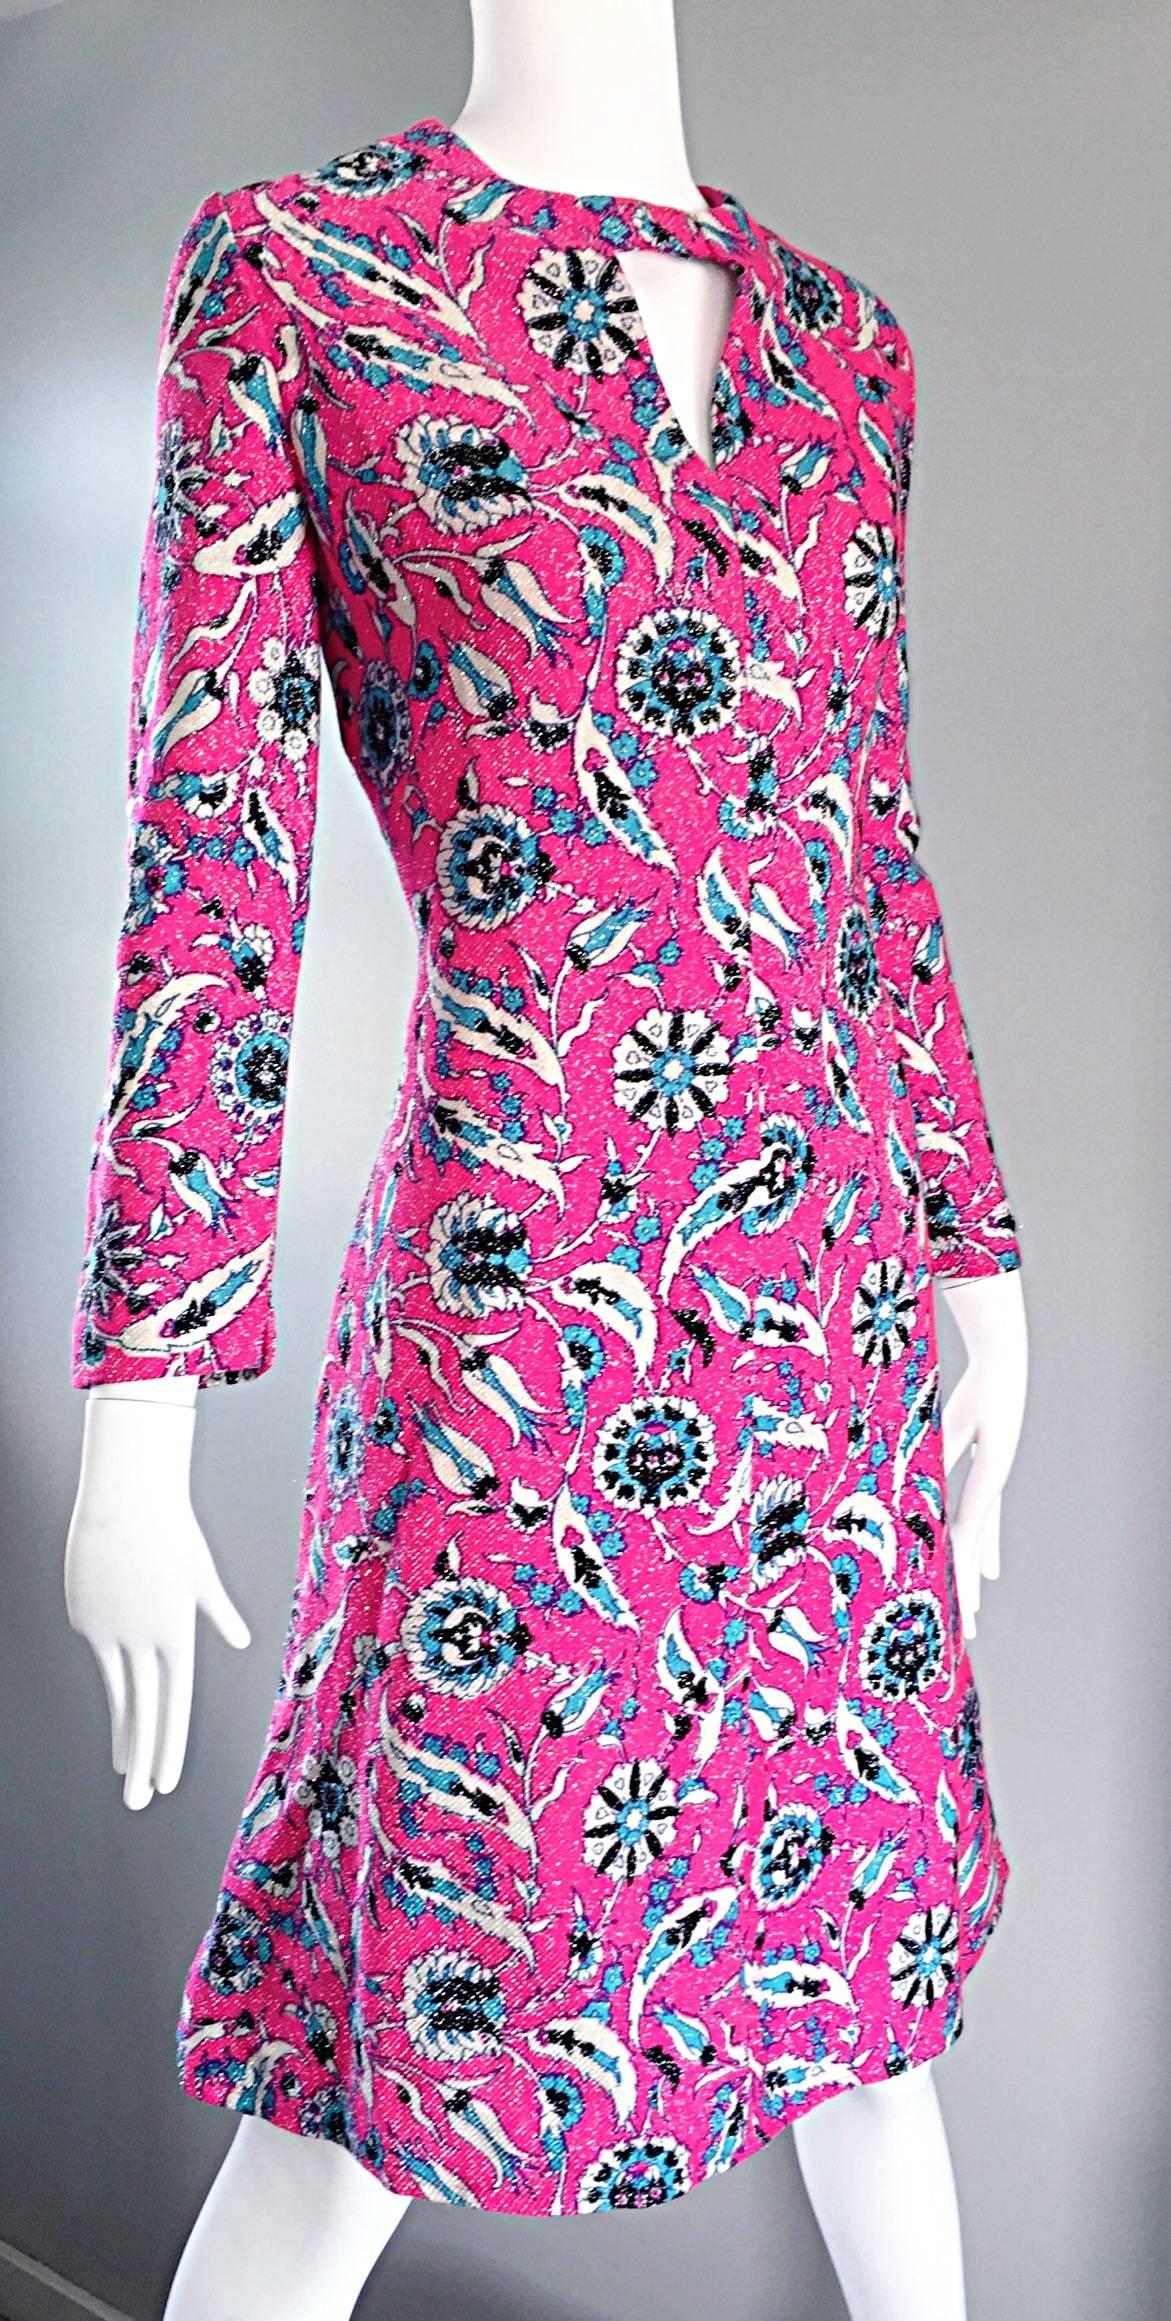 Vintage Adele Simpson Plus Size 1960s Hot Pink + Silver + Blue Metallic Dress In Excellent Condition For Sale In San Diego, CA